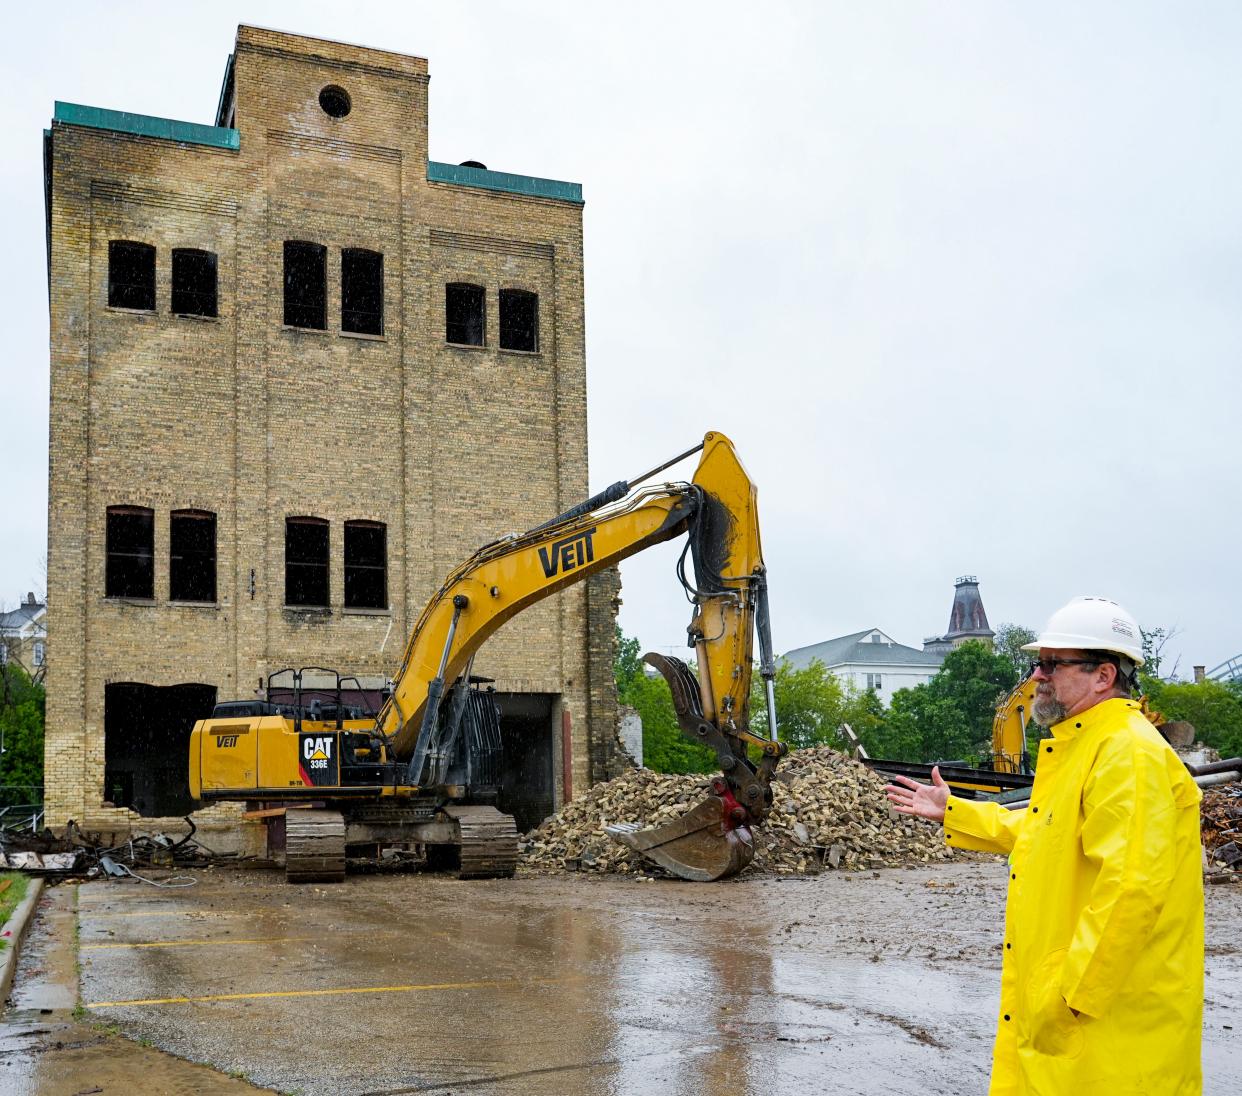 Scott Ladwig, engineering technician at the VA Medical Center, said the goal in taking down the old power plant on the site is to save about 1,500 Cream City bricks for use elsewhere.